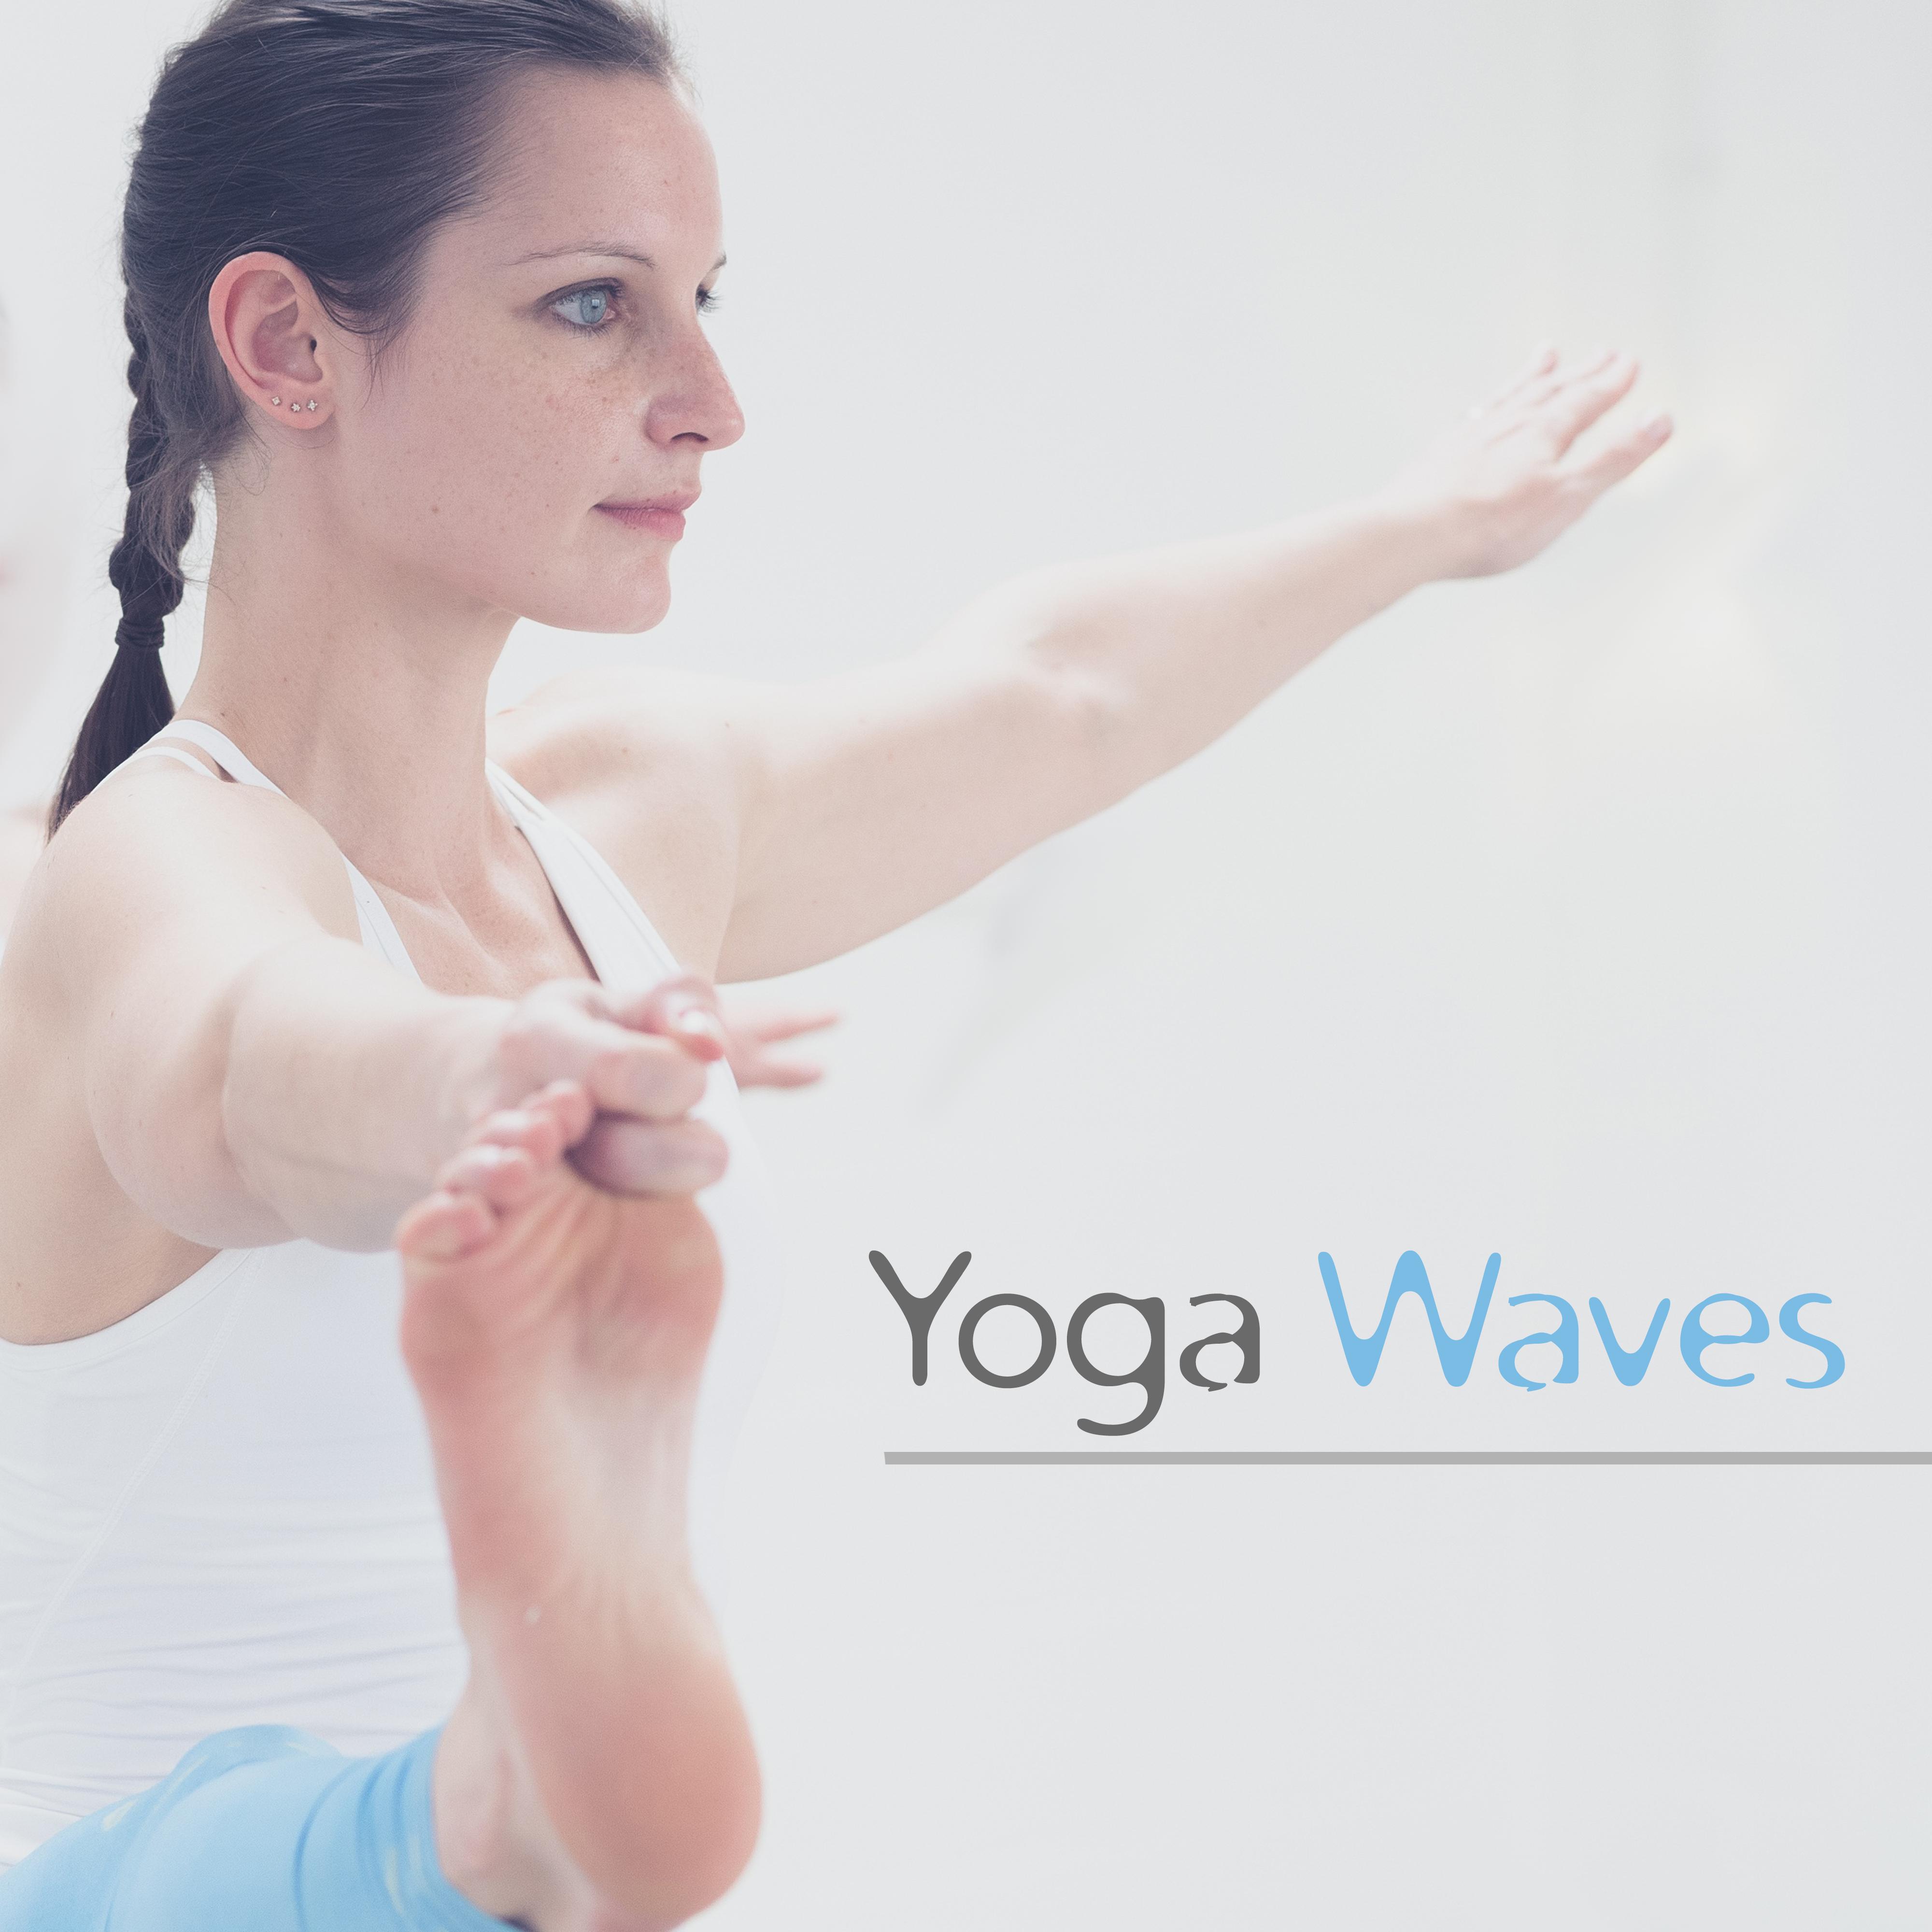 Yoga Waves  Relaxing Sounds of Nature, Healing New Age, Deep Meditation, Hatha Yoga, Power of Music to Meditation